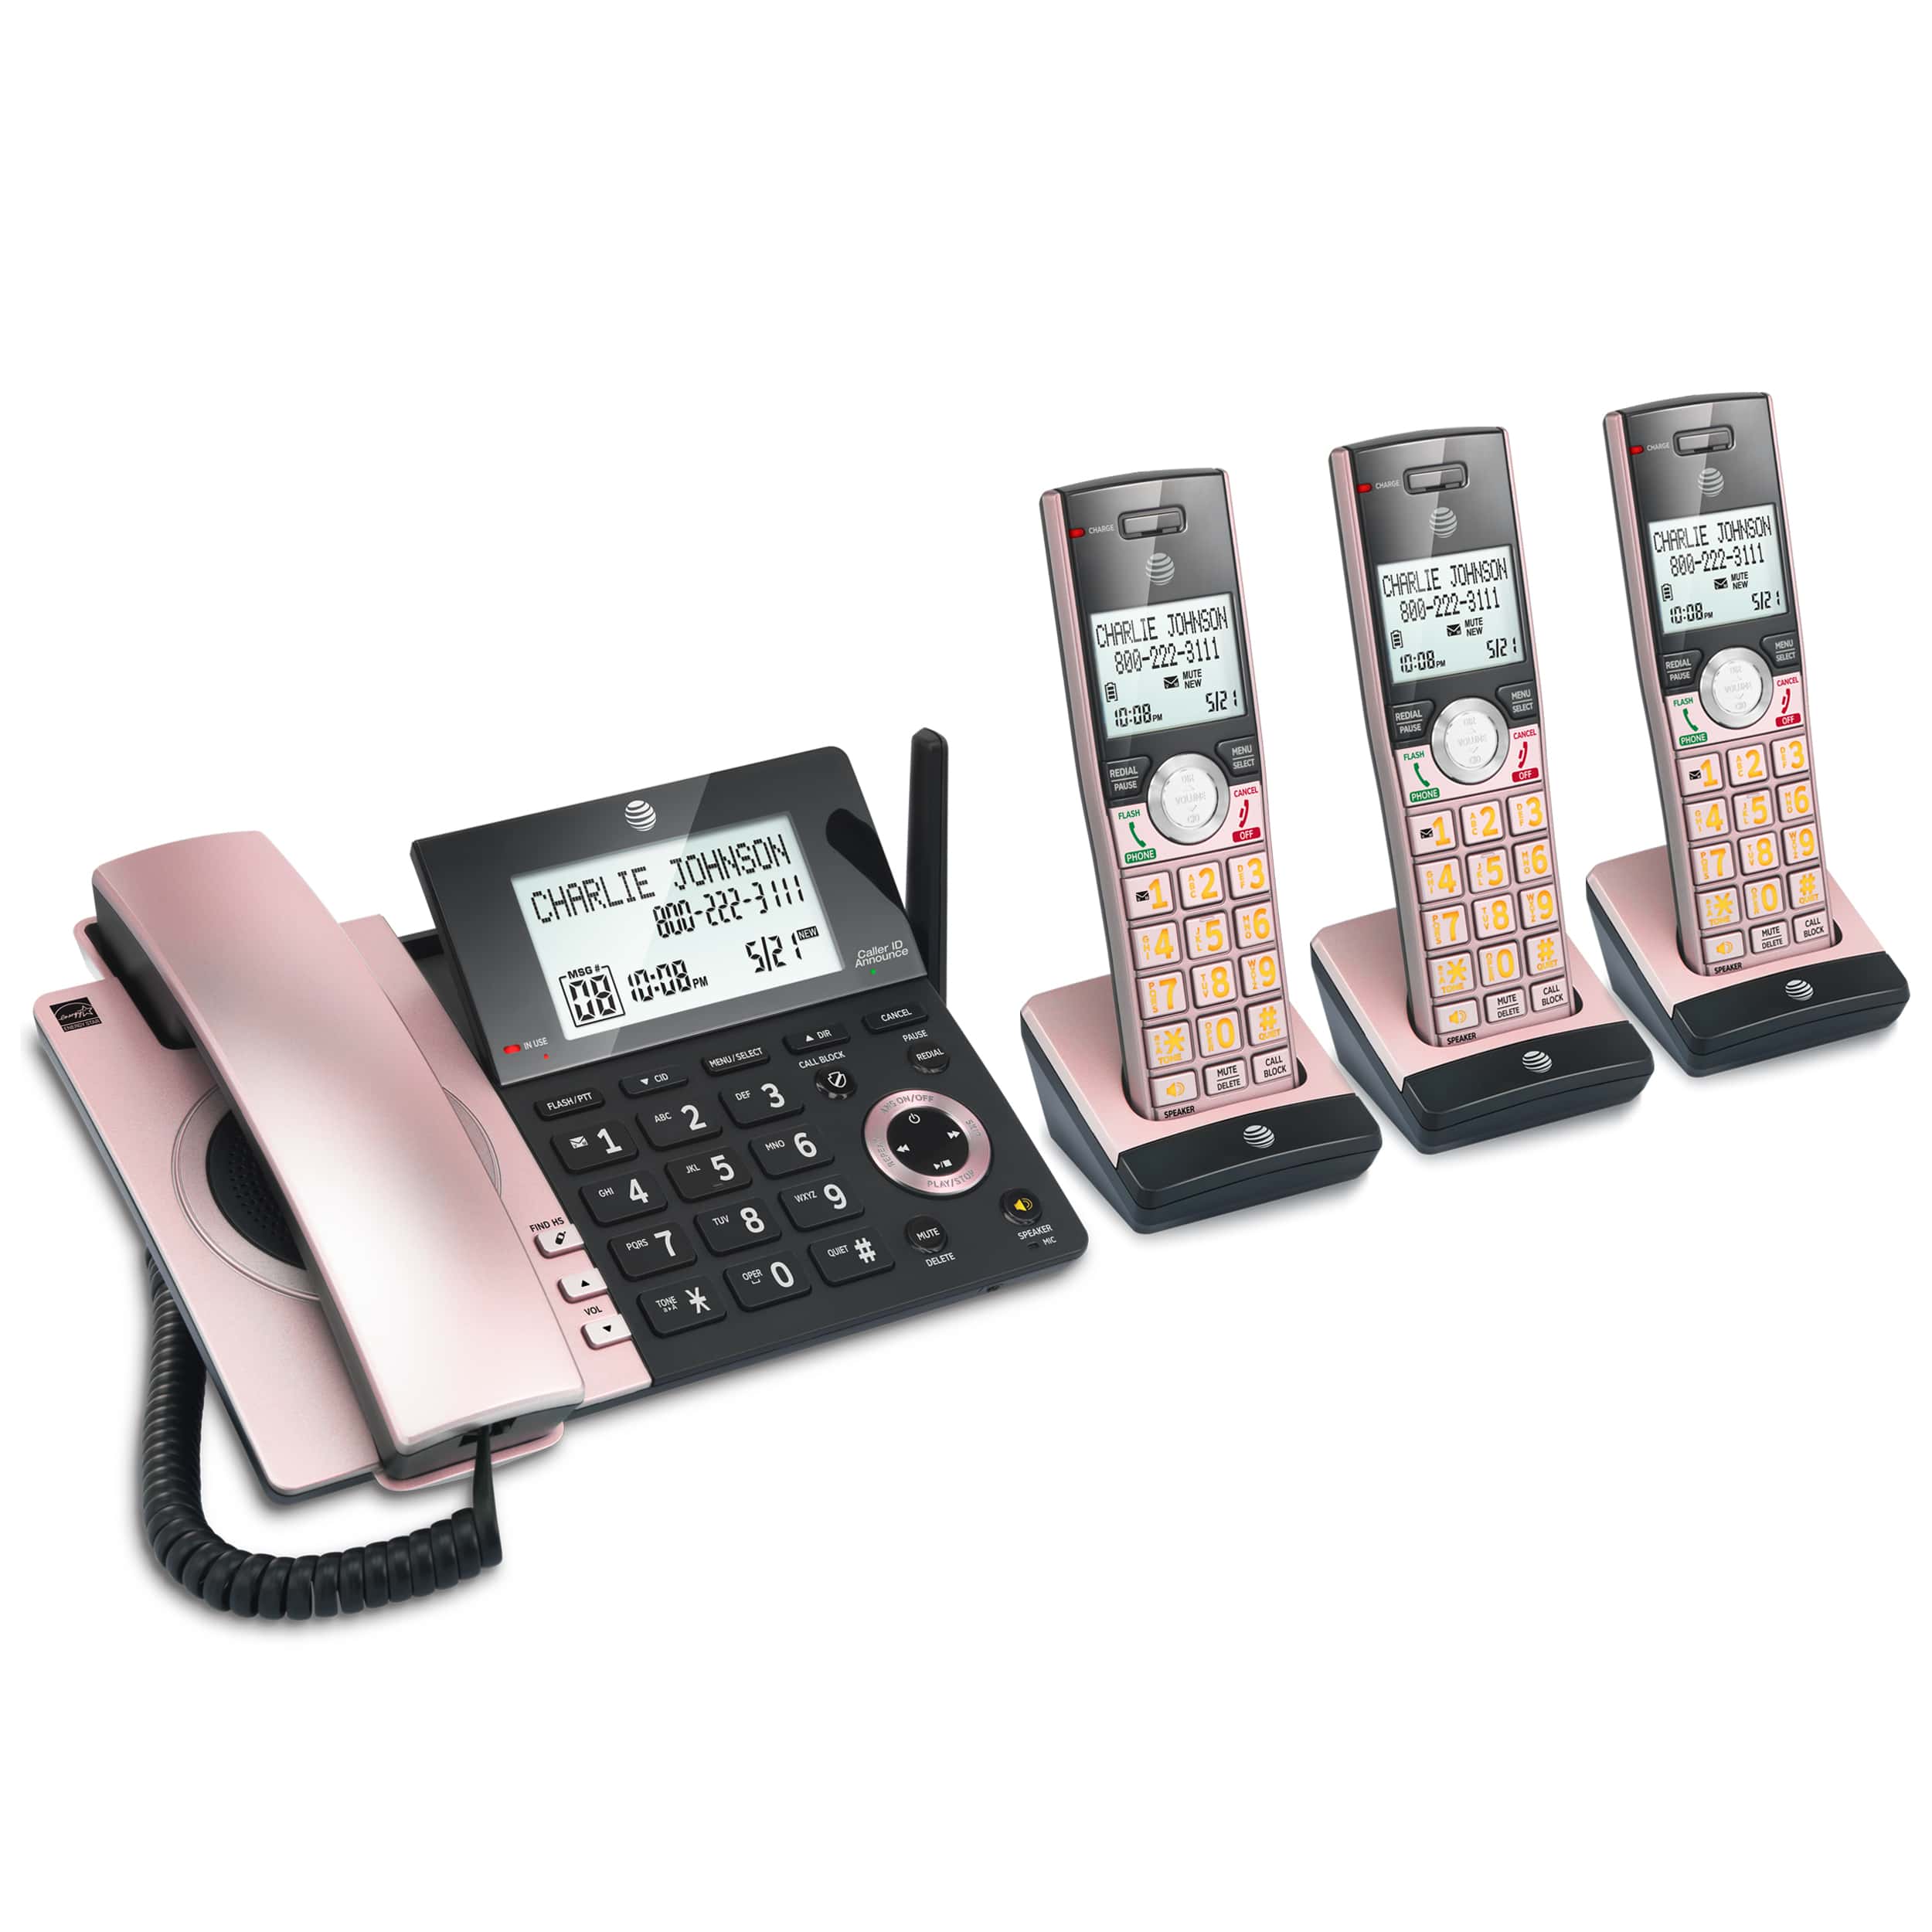 AT&T Corded Telephones with Answering Systems